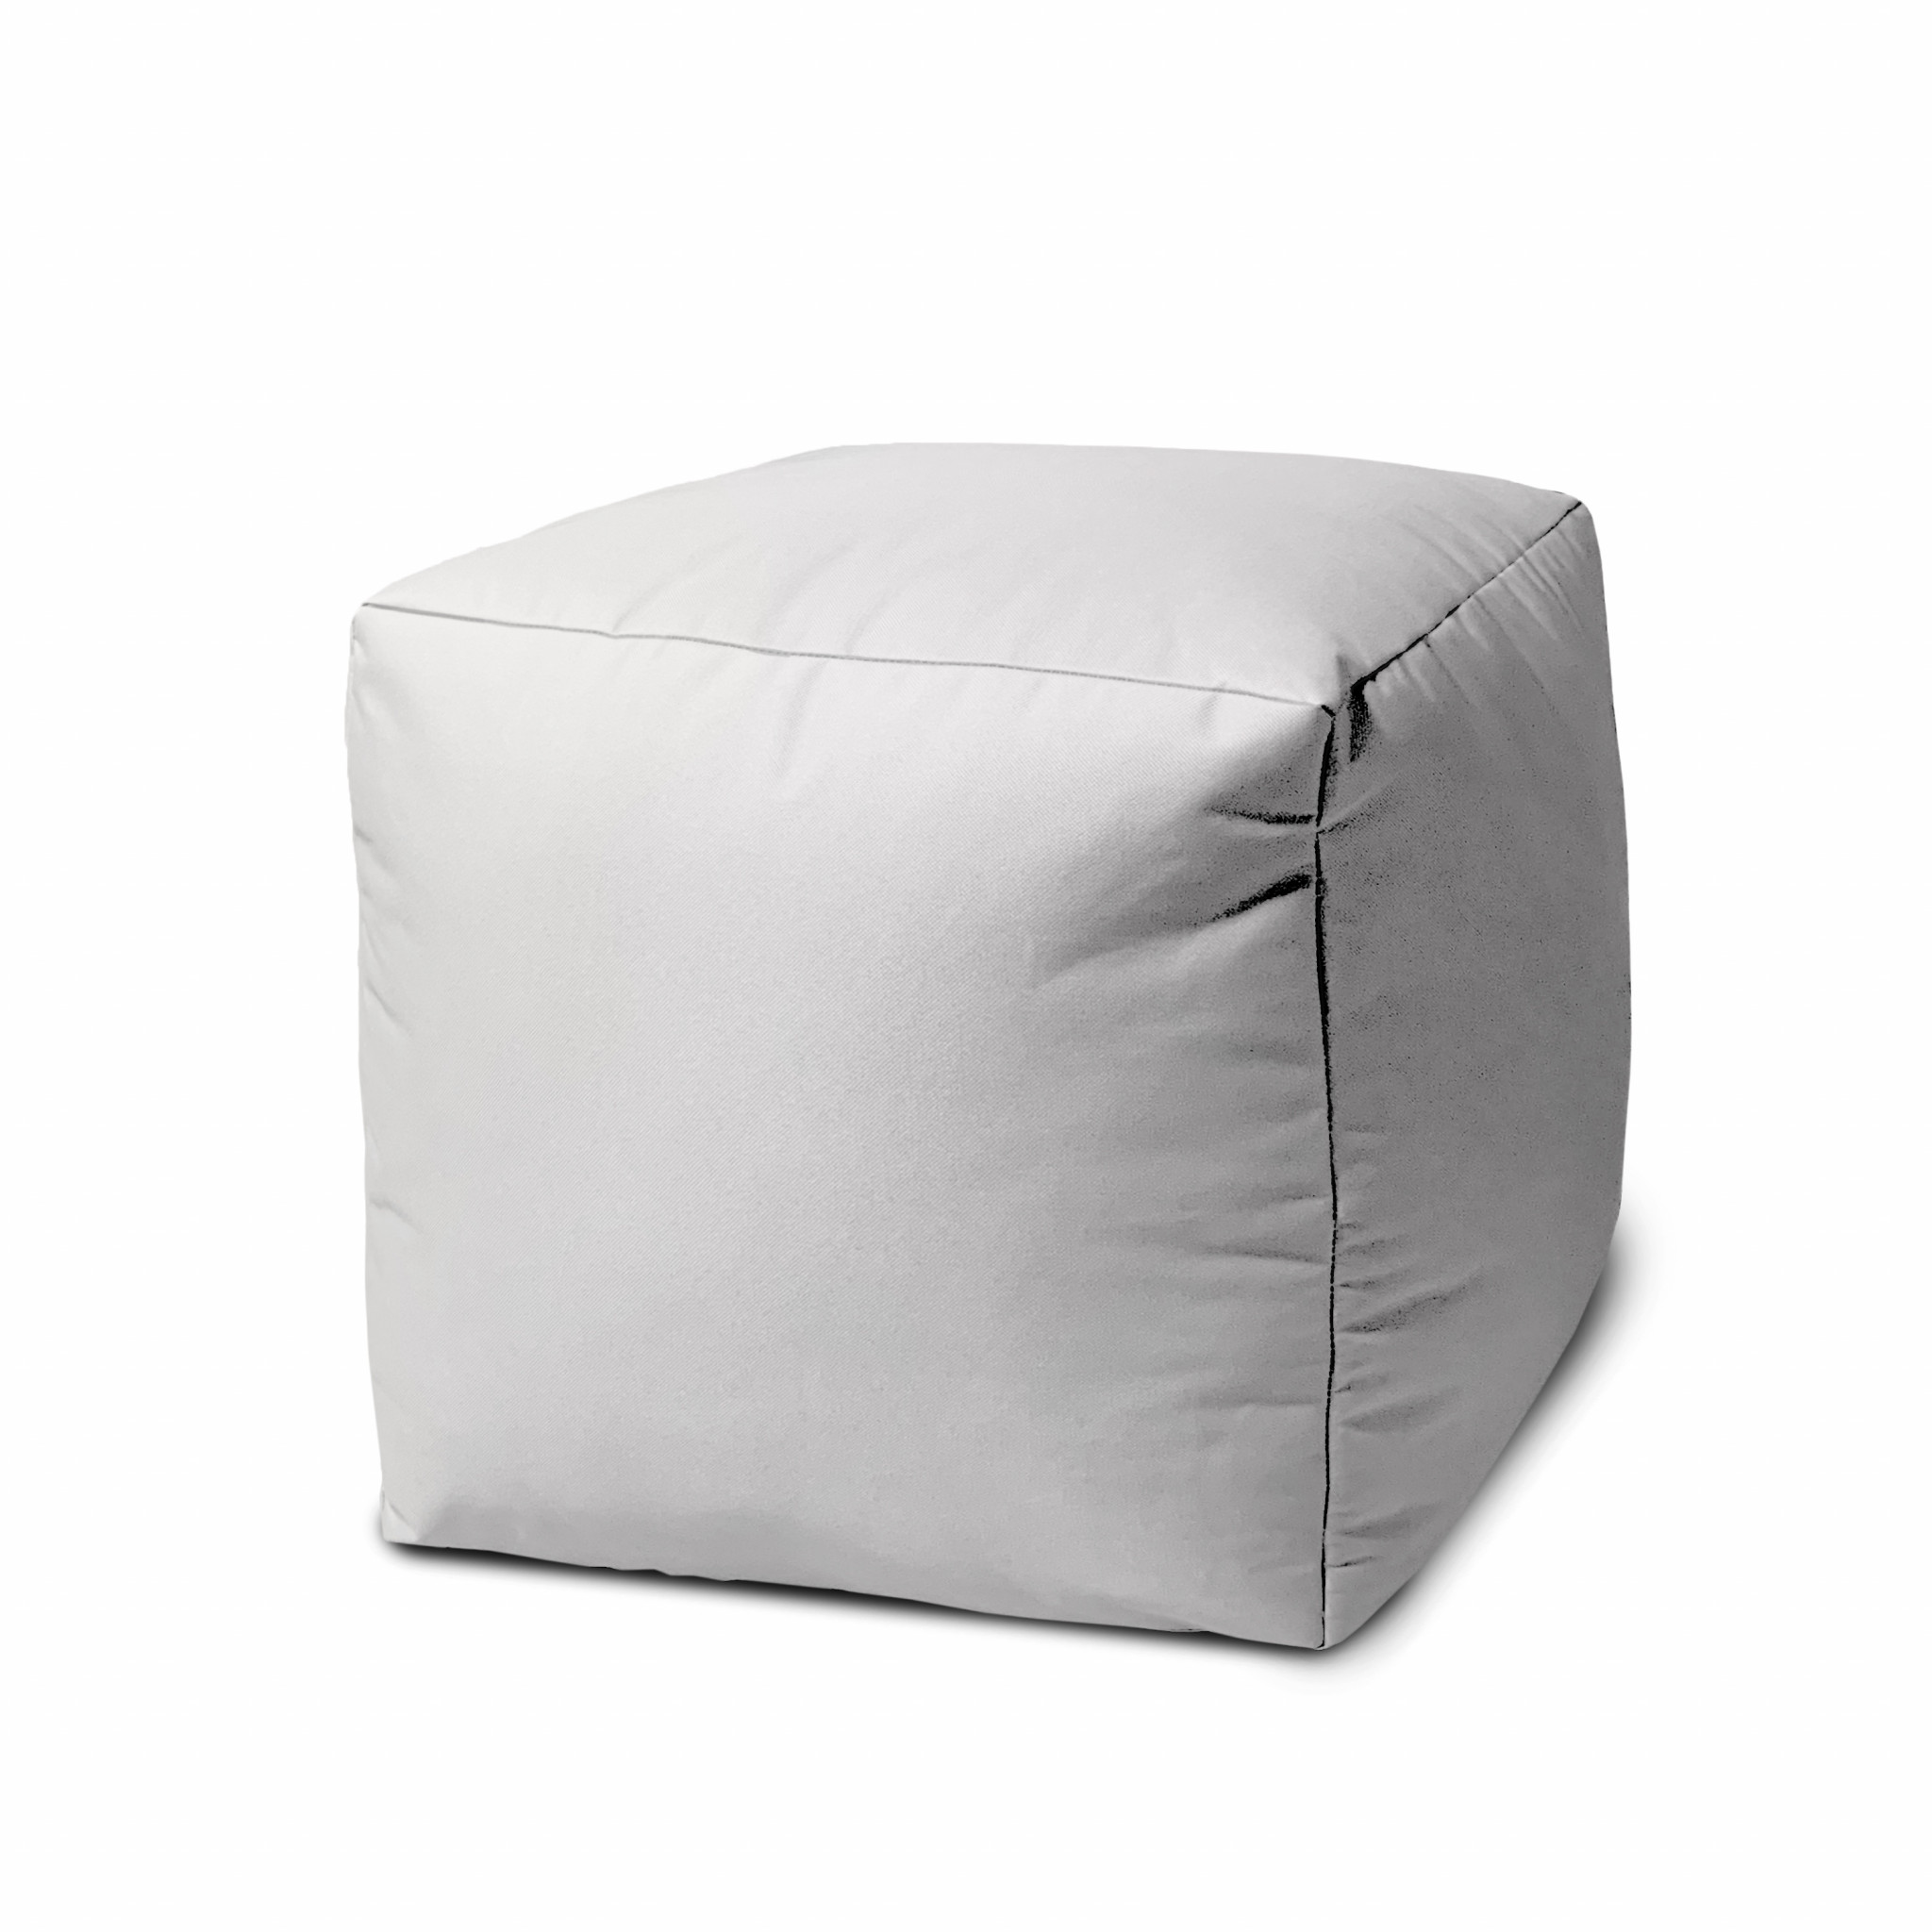 17" Cool Crisp White Solid Color Indoor Outdoor Pouf Ottoman-474130-1